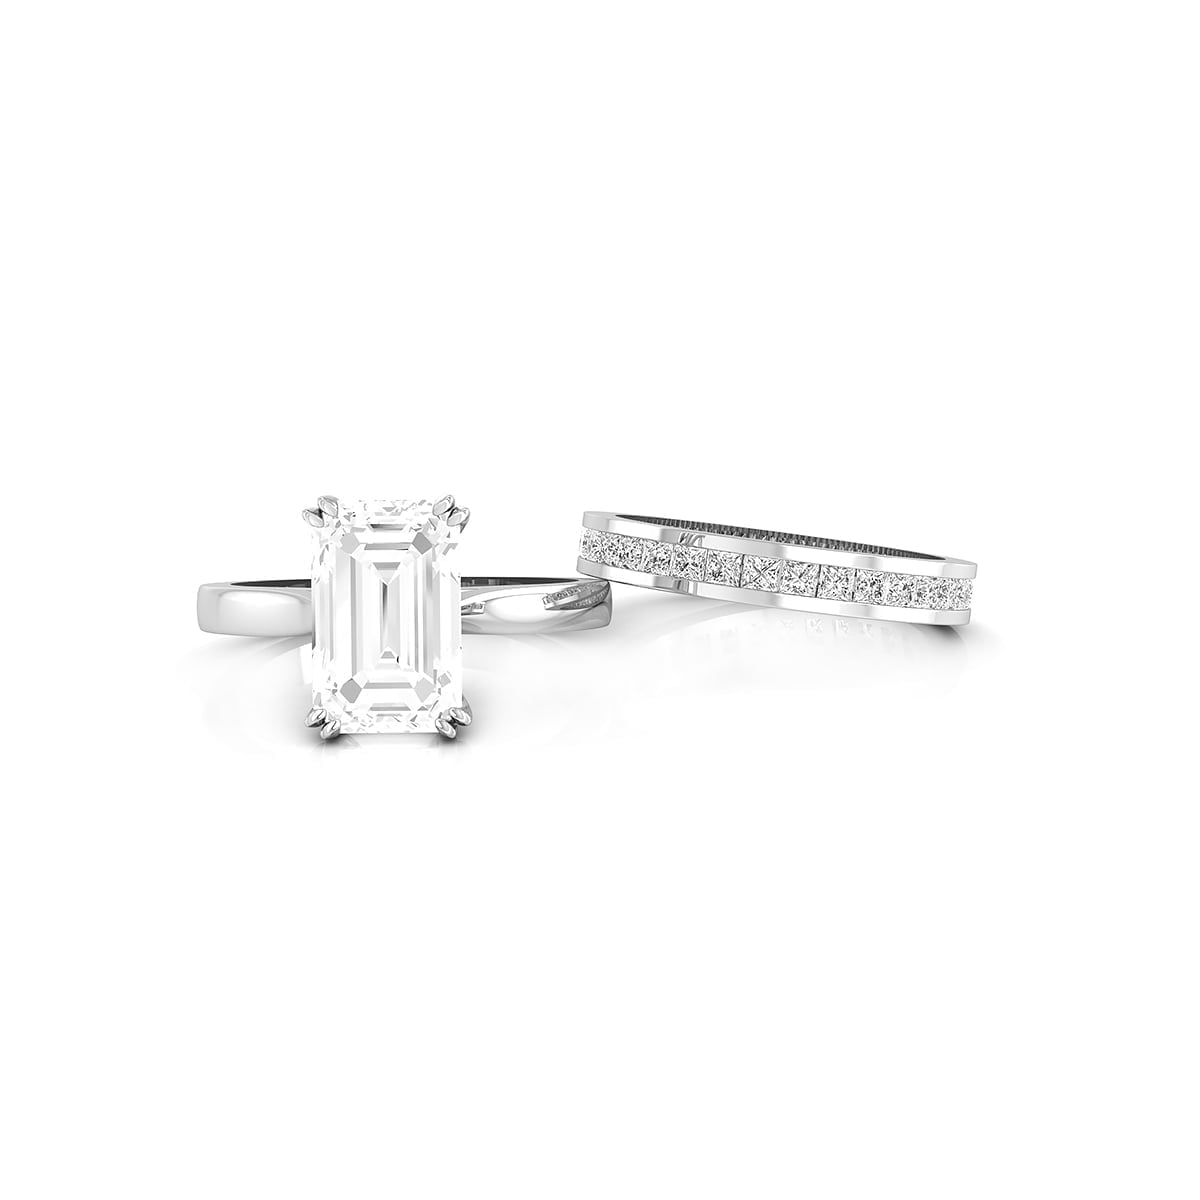 Emerald Or Princess Cut CZ Stone Solitaire Wedding Ring Set For Women ( 6 5/9 TCW)